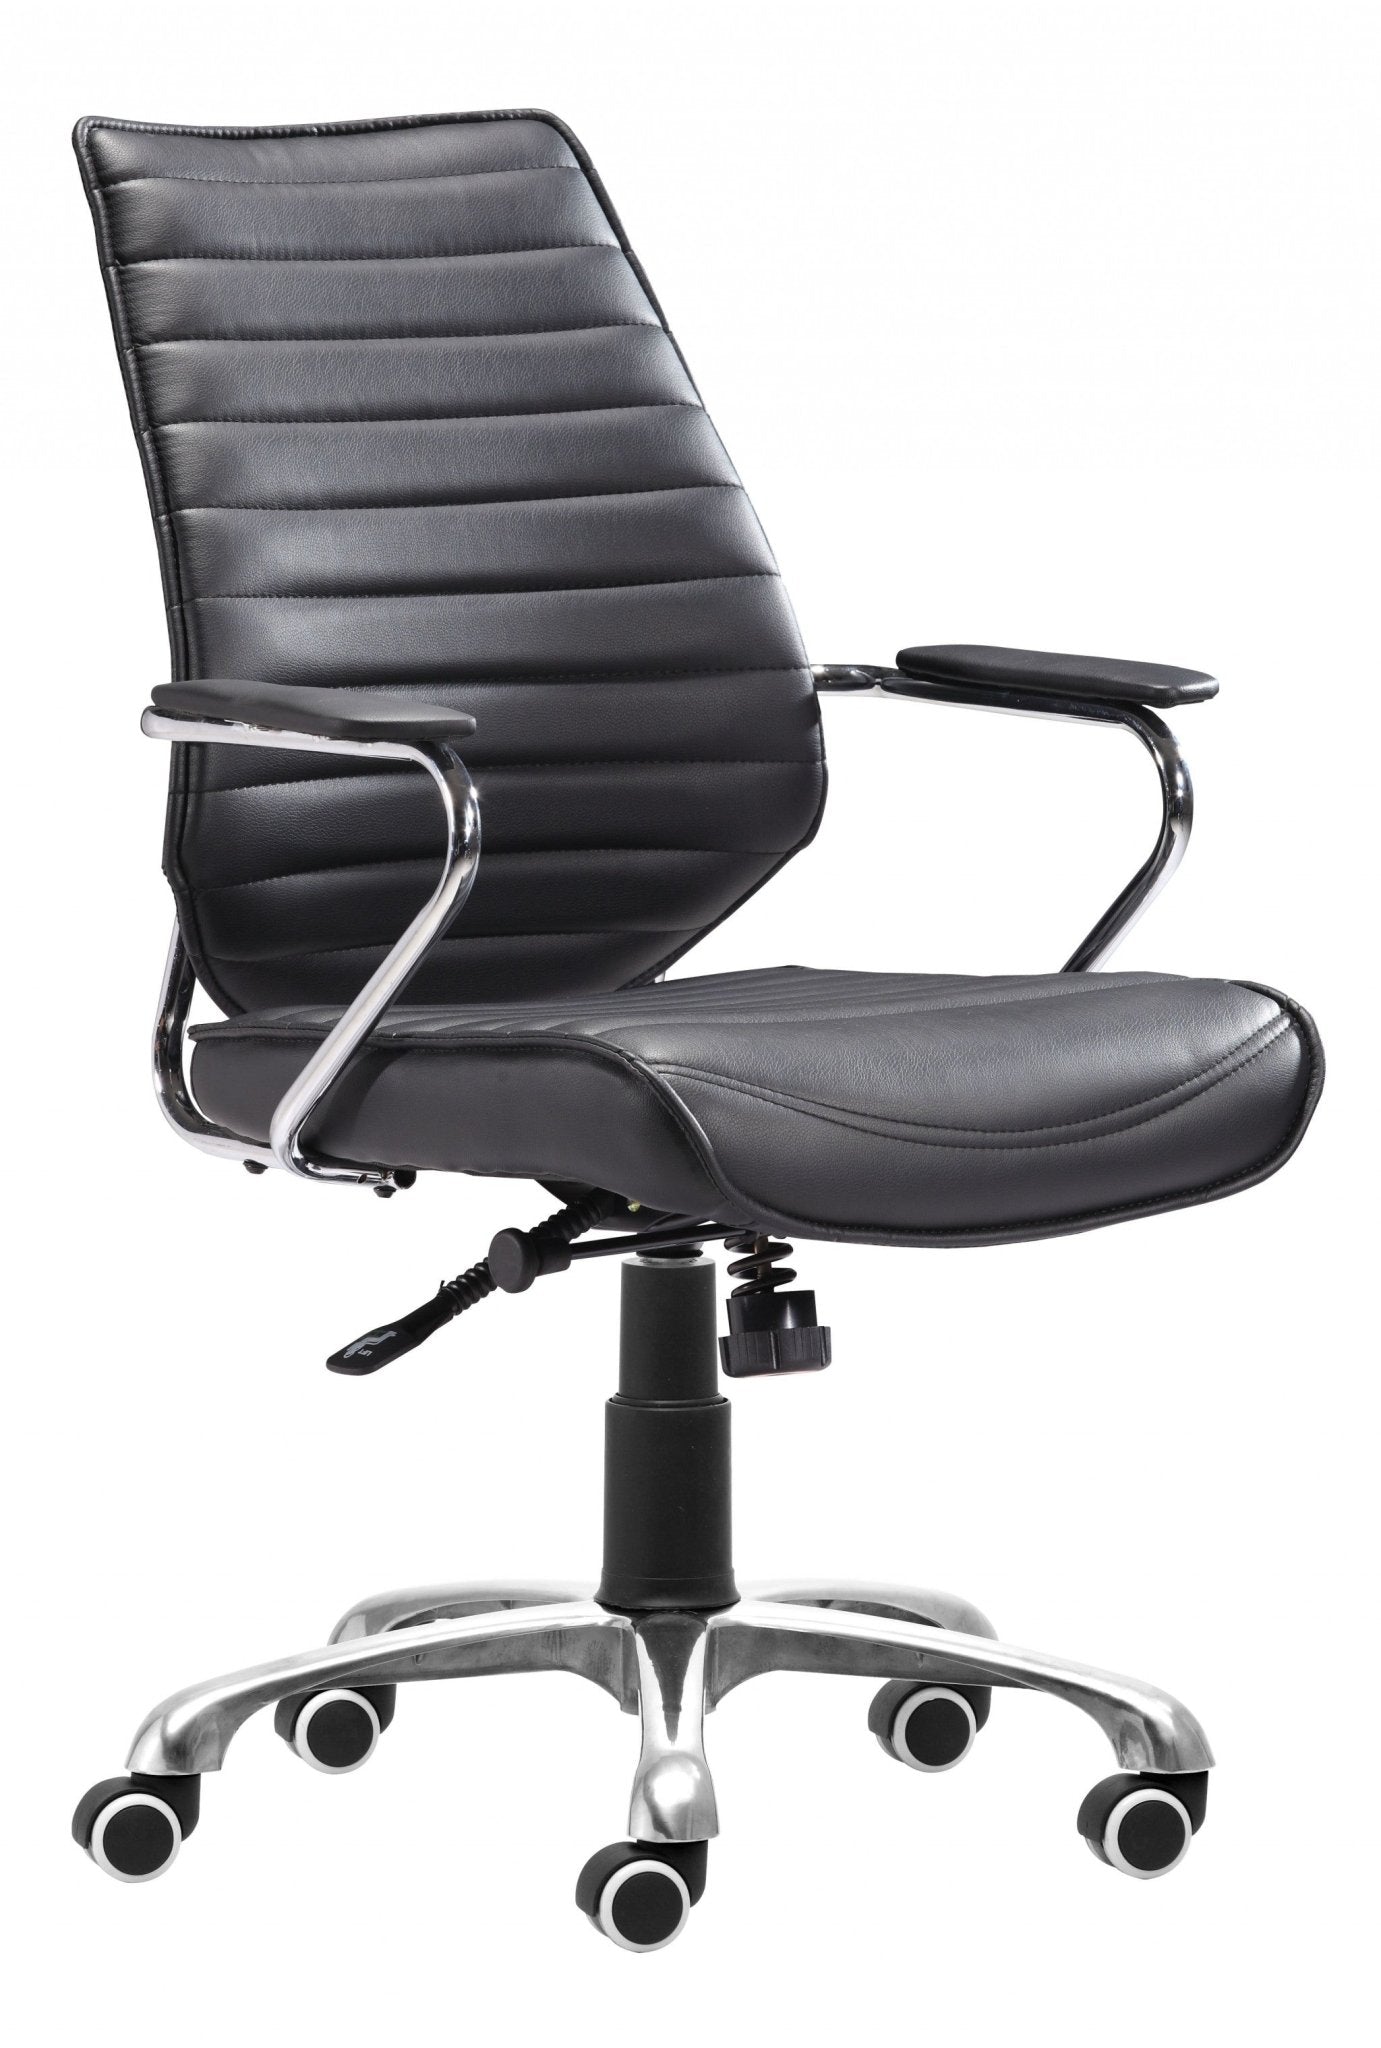 Black-Faux-Leather-Executive-Channel-Back-Rolling-Office-Chair-Office-Chairs